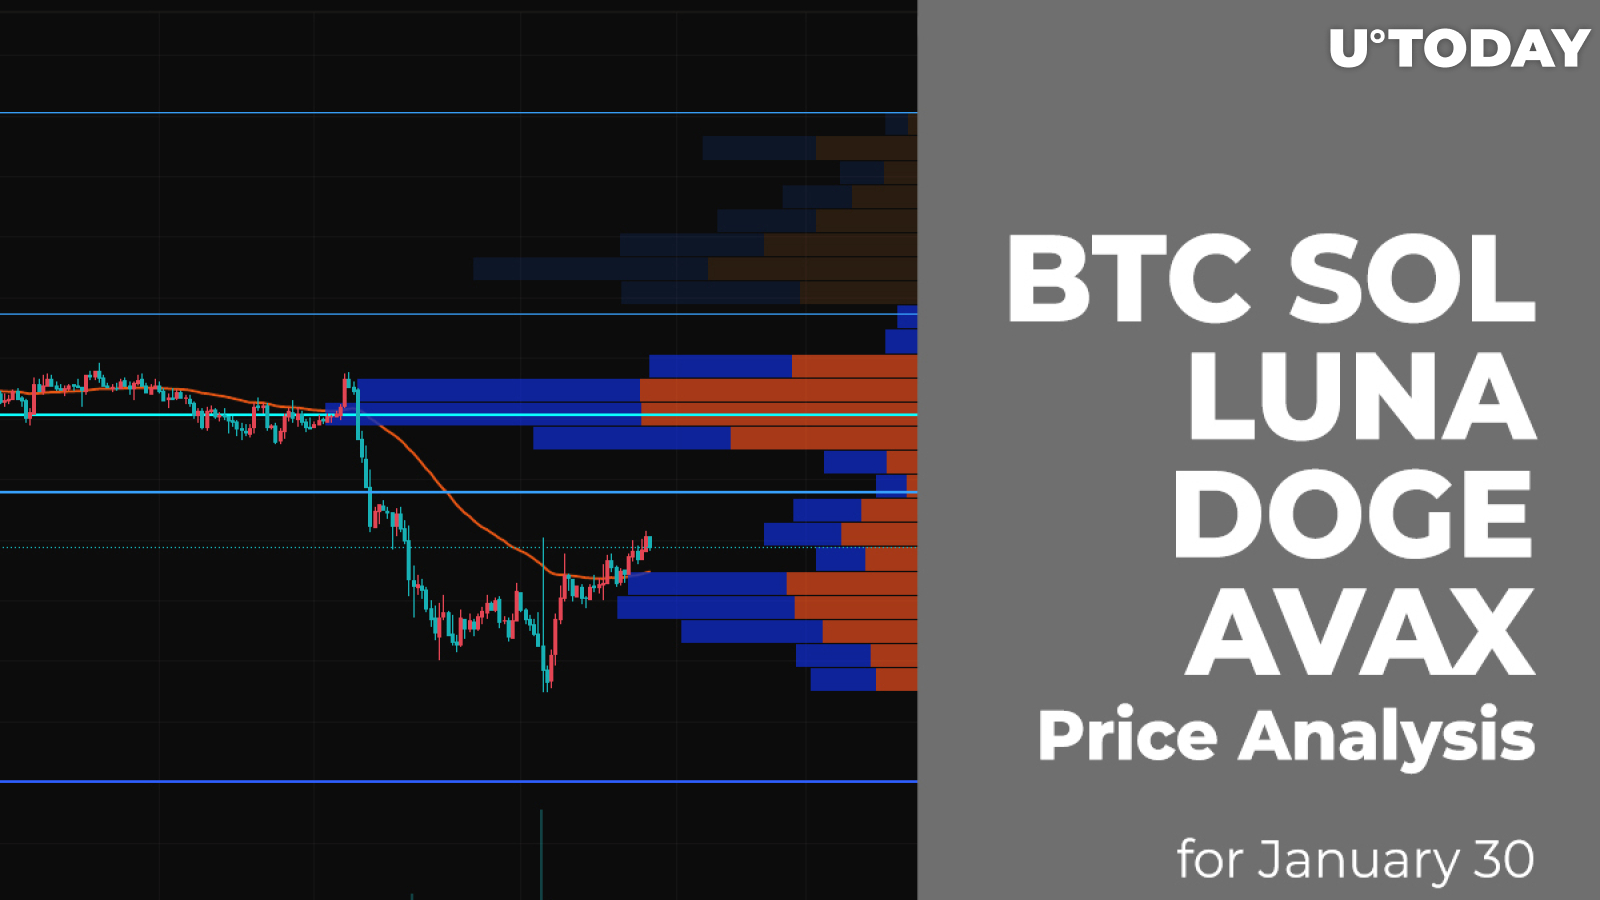 BTC, SOL, LUNA, DOGE and AVAX Price Analysis for January 30